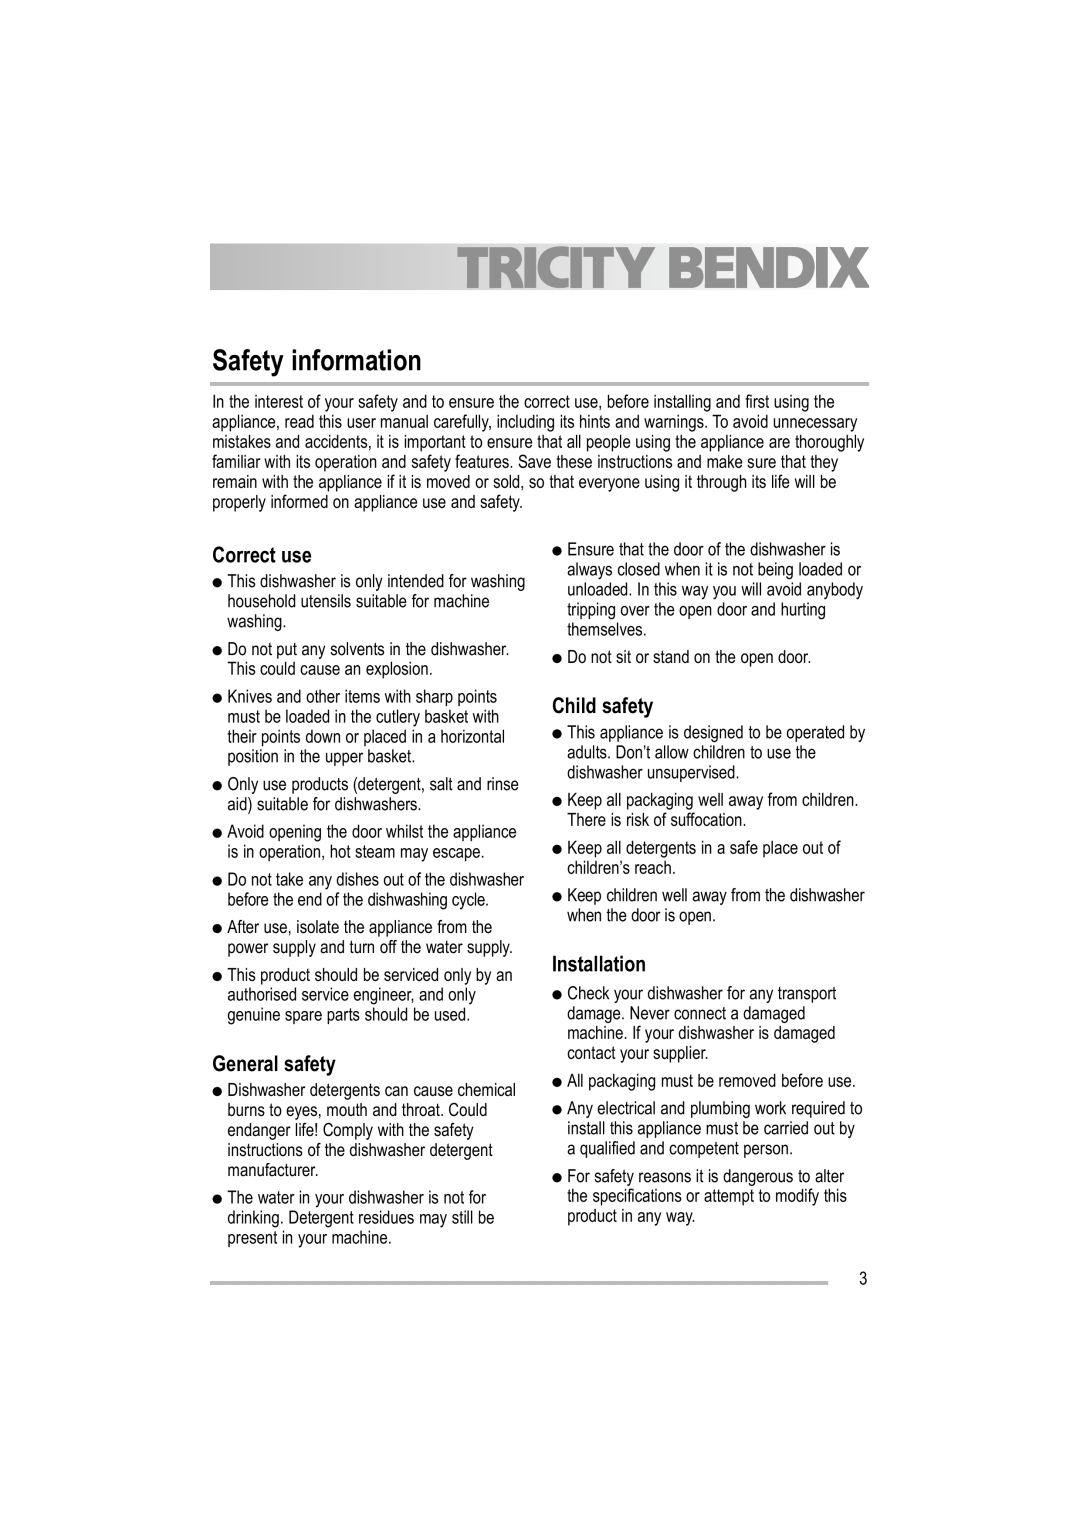 Tricity Bendix TDF 221 manual Safety information, Correct use, General safety, Child safety, Installation 